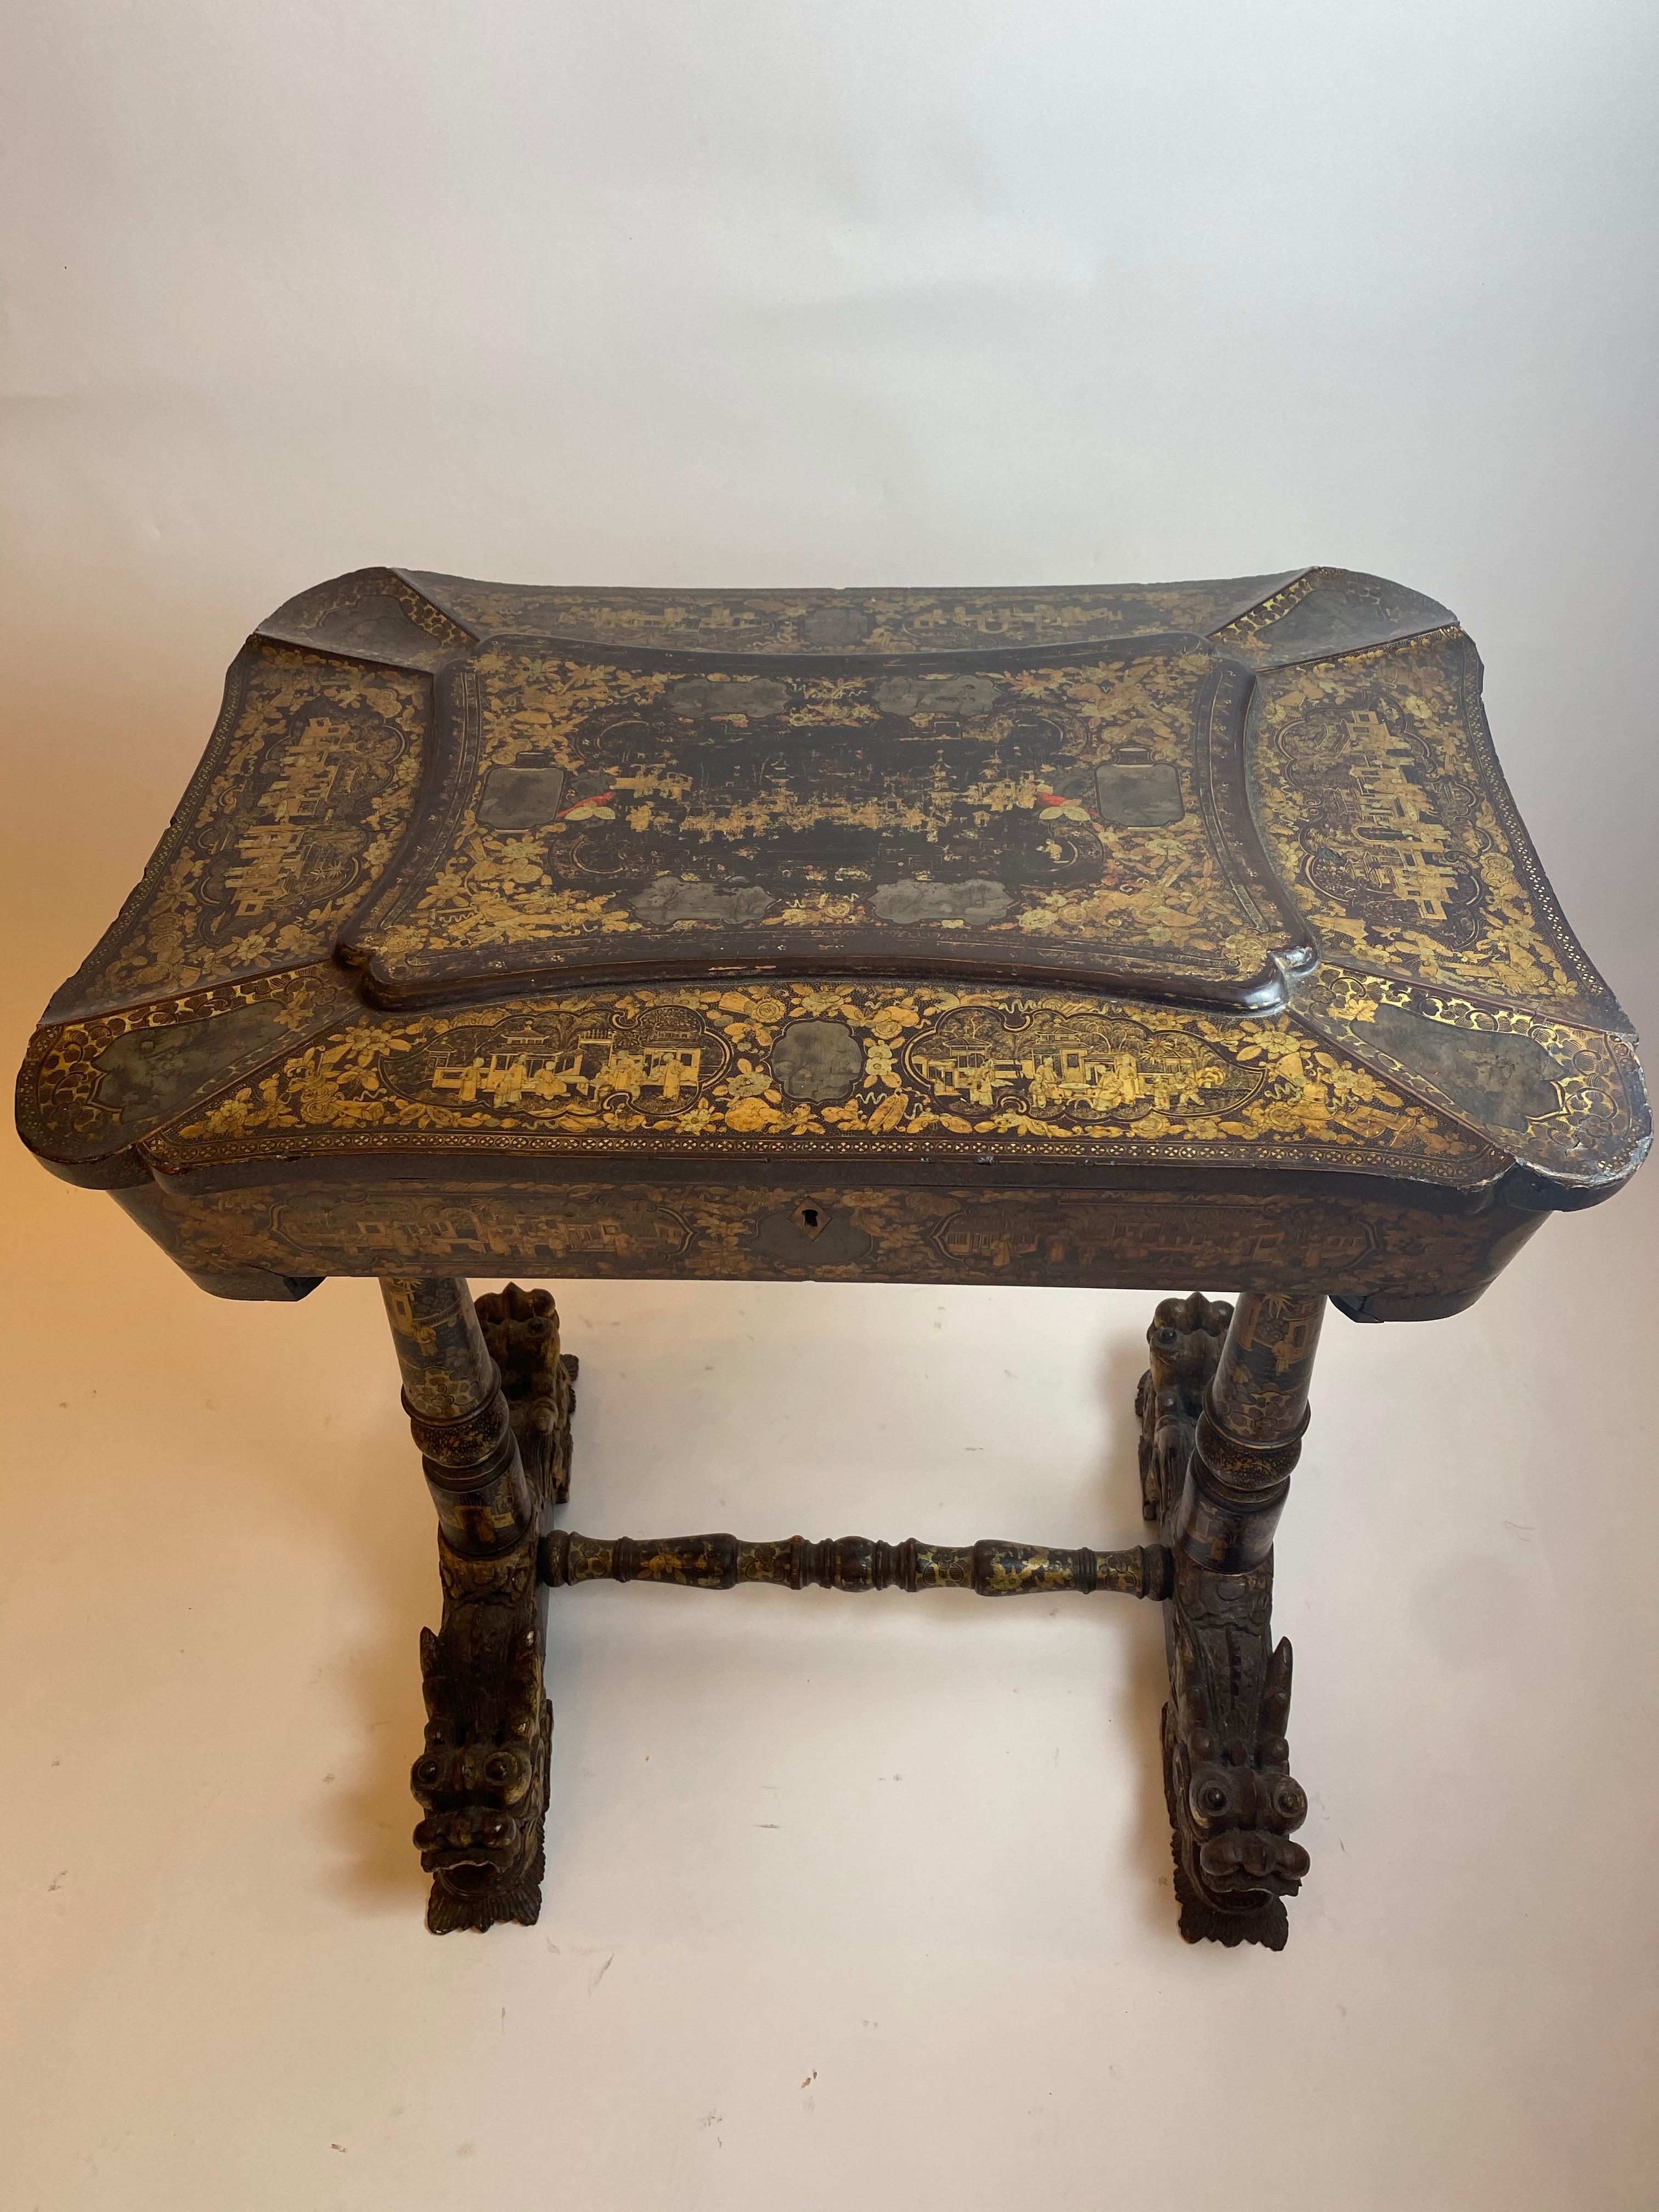 Early 19th Century Chinese Export Lacquer and Gilt Work Table For Sale 2